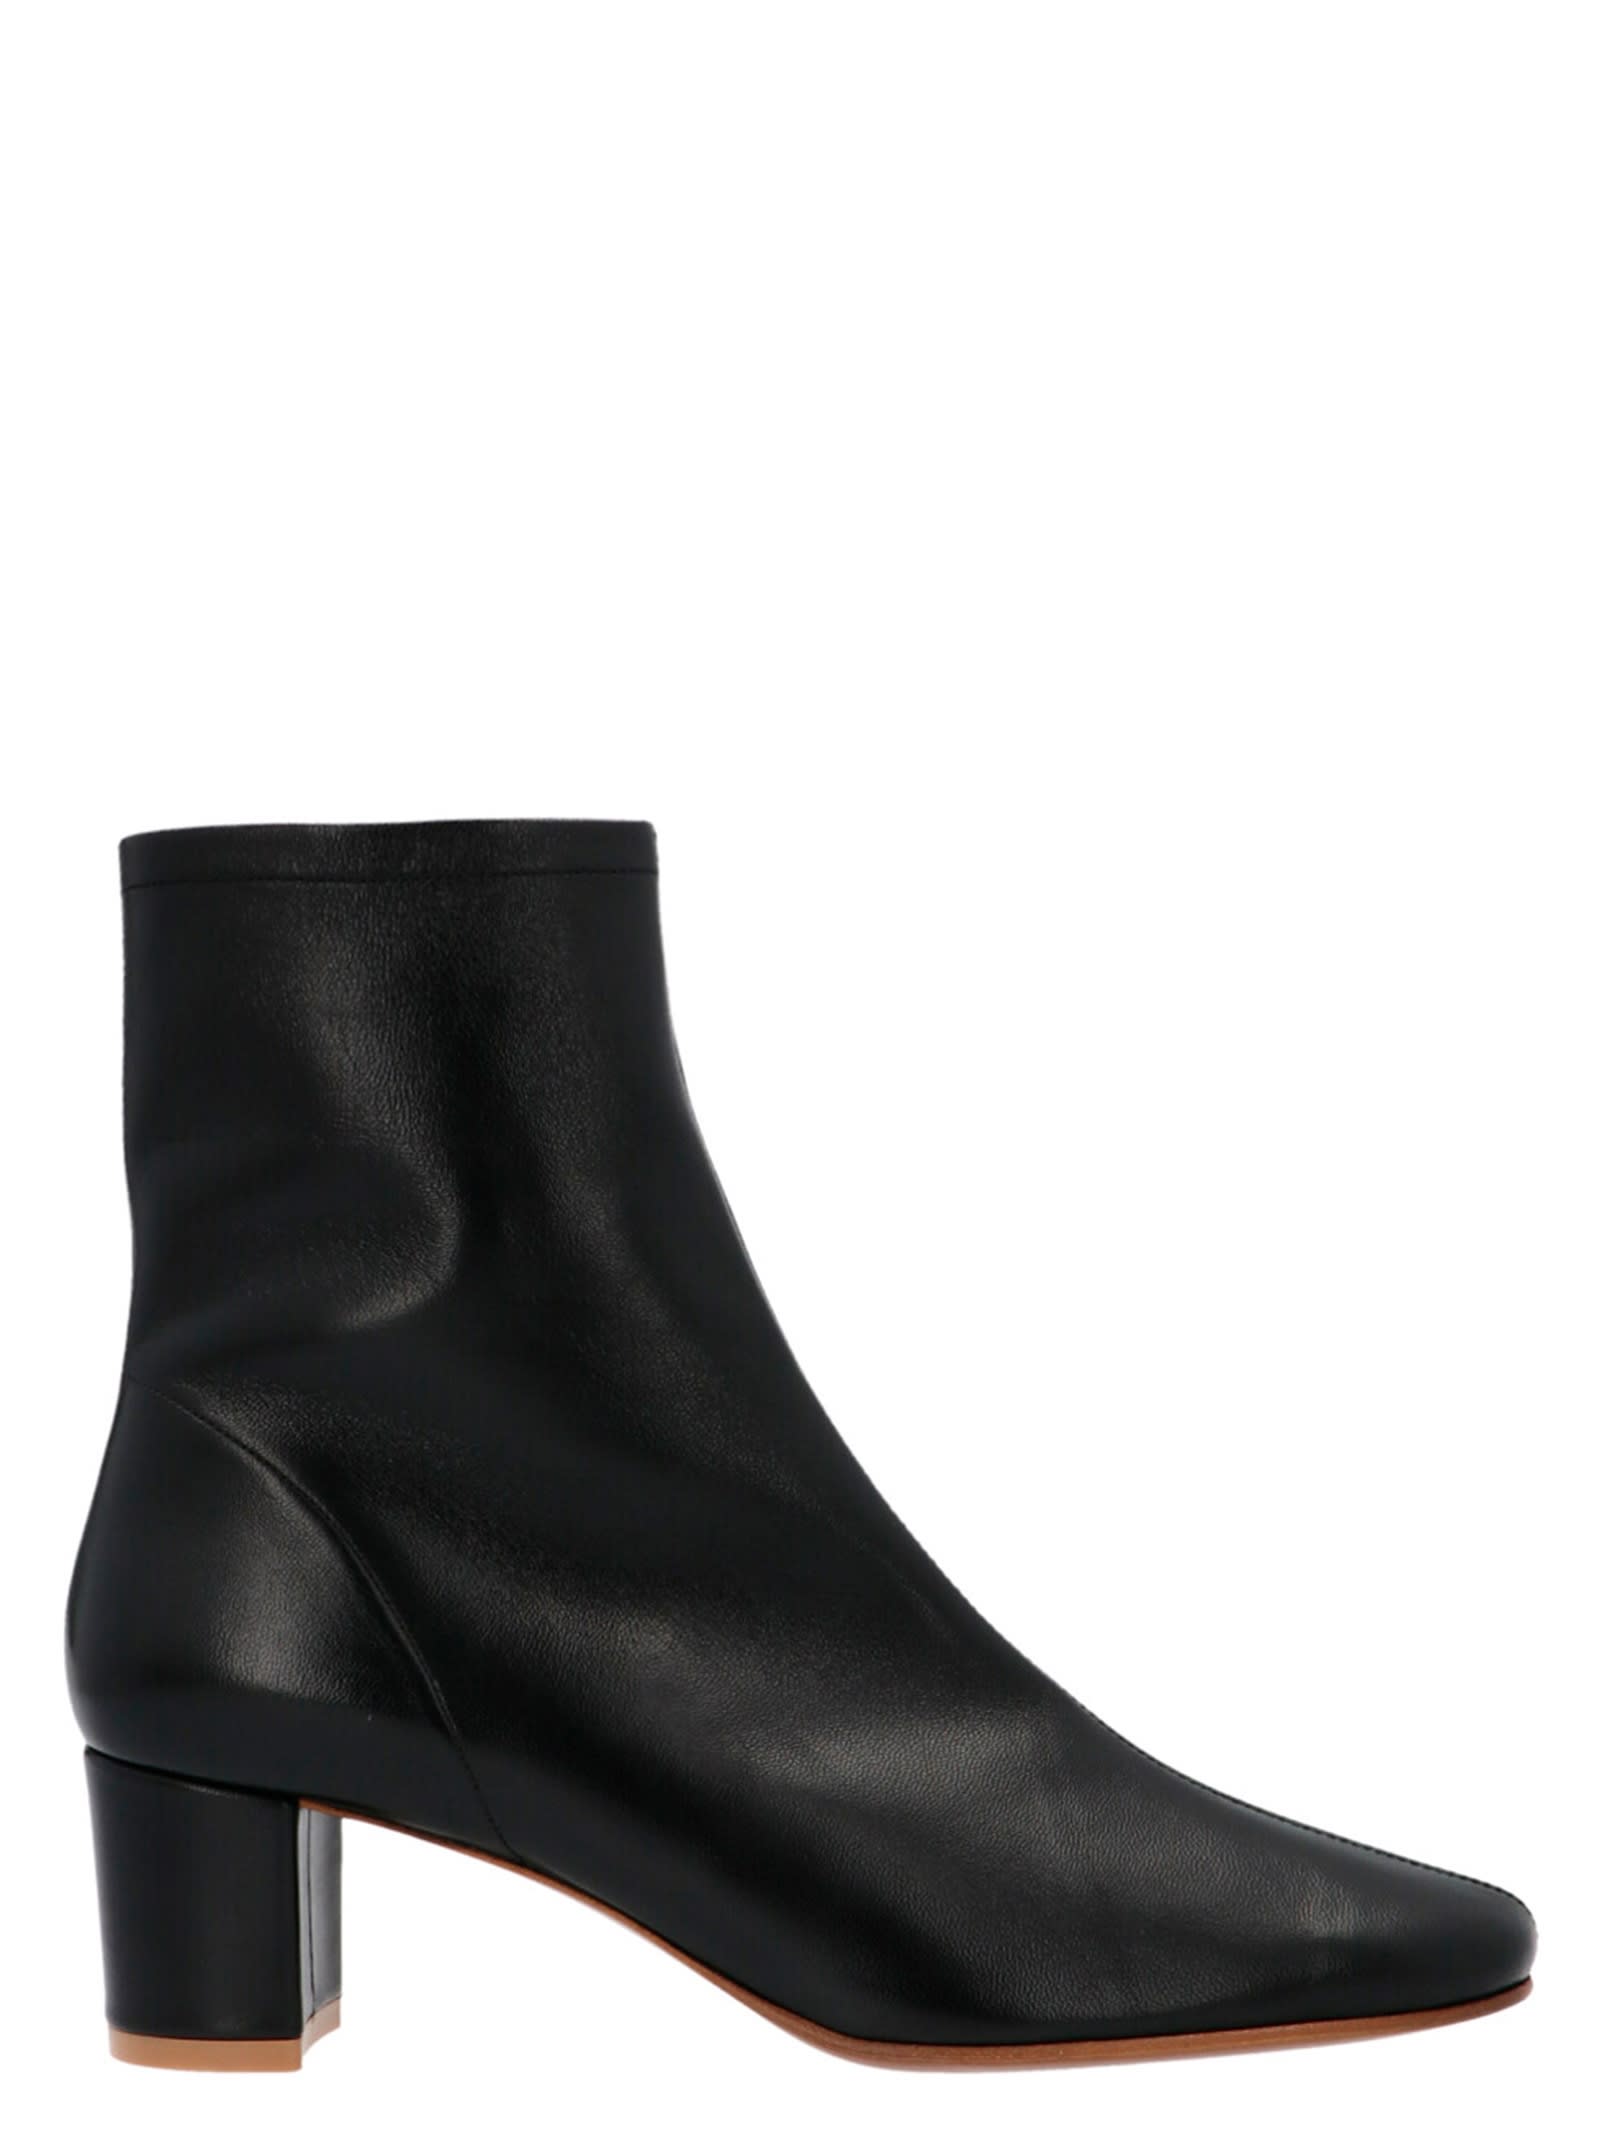 BY FAR sofia Ankle Boots